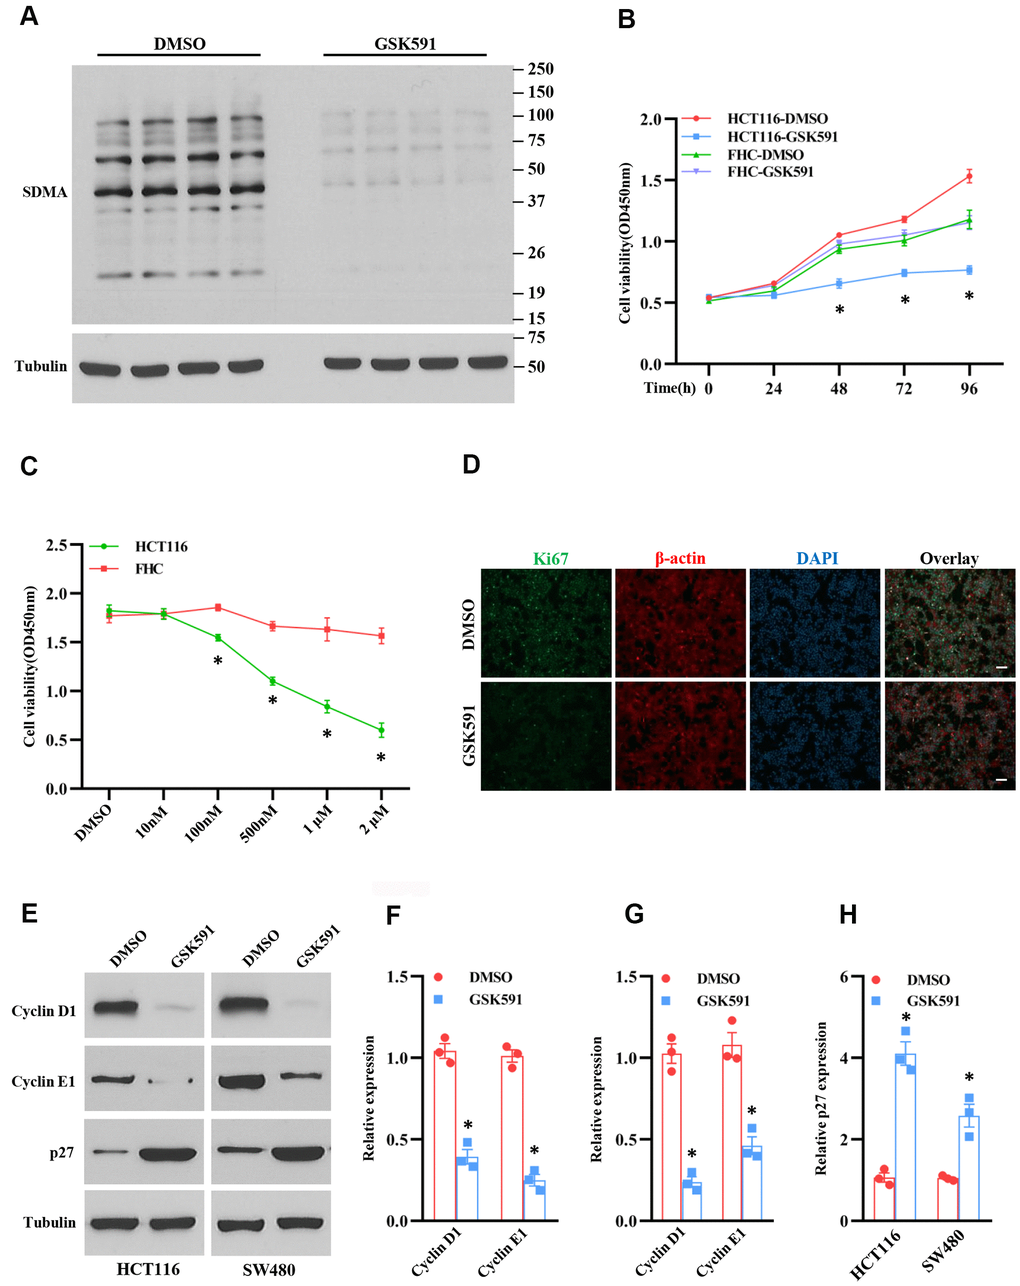 Inhibition of PRMT5 suppresses cell growth and cell cycle progression. HCT116, SW480, and FHC cells are treated with different doses and time points of GSK591, a PRMT5 specific inhibitor. (A) The global symmetric dimethylarginine (SDMA) is detected by Western blotting. Representative data is shown. (B) Cell viability is measured during different time points in HCT116 and FHC cells (n=4). *P C) Cell viability is measured in HCT116 and FHC cells with different doses of GSK591 (n=4). *P D) Immunostaining of ki67 in HCT116 cells treated with GSK591. Scale bar = 50μm. (E) Western blot analysis of cyclin D1, cyclin E1, and p27 protein expression level in HCT116 and SW480 cells. Representative data is shown. (F–H) Indicated proteins are quantified in HCT116 and SW480 cells. *P 